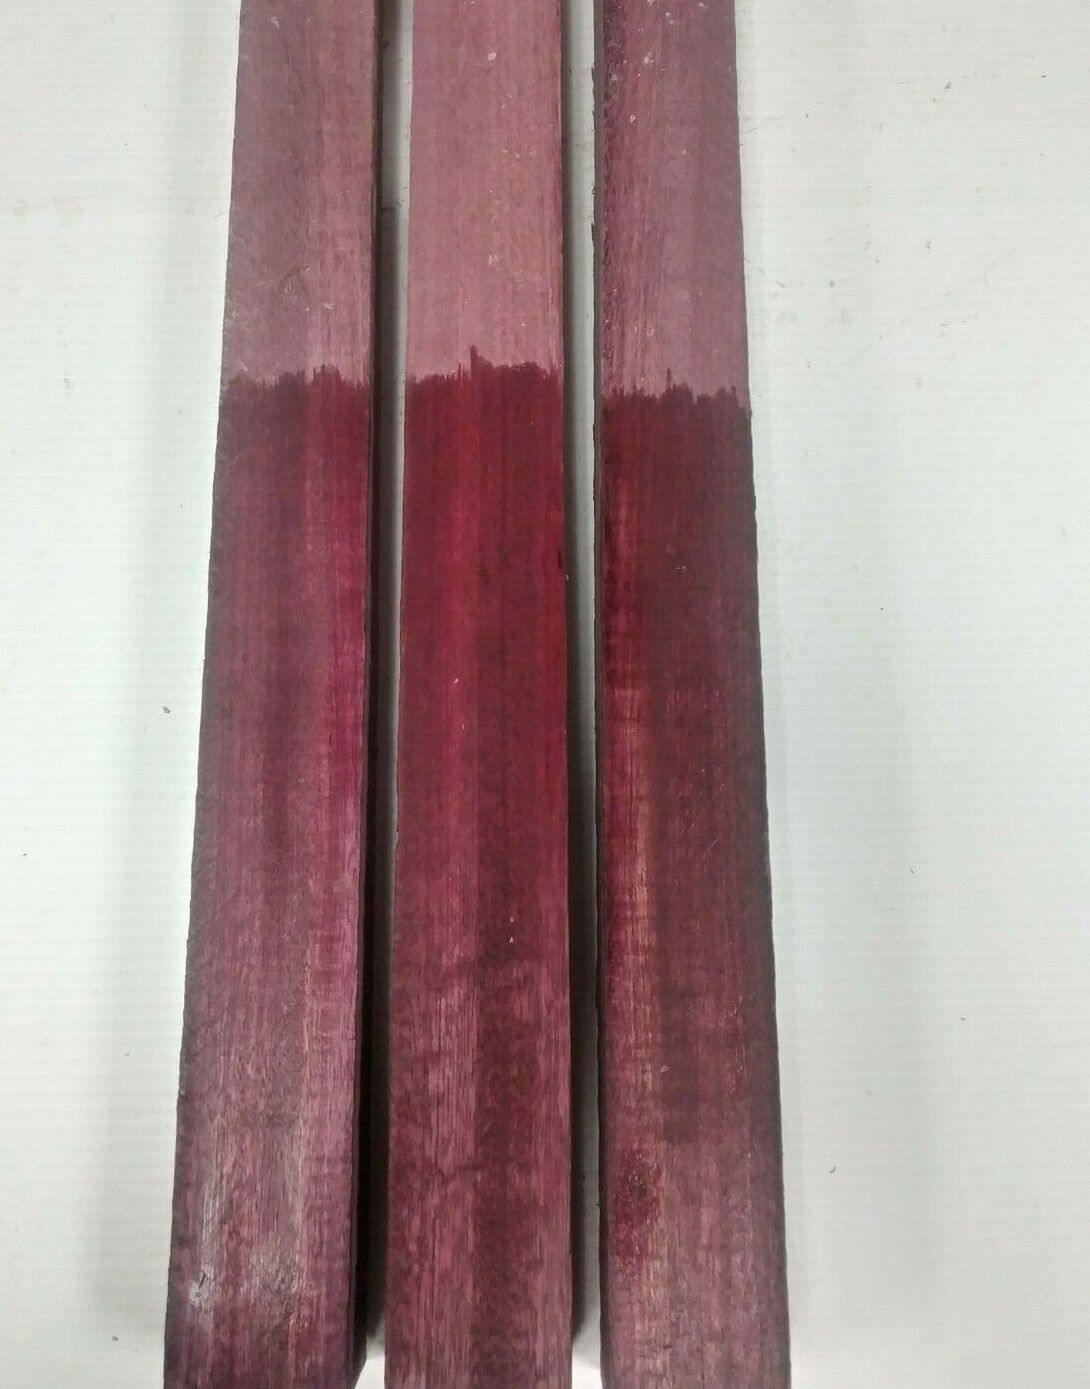 LOT OF 3 PIECES PURPLEHEART THIN STOCK BOARDS LUMBER CRAFTS WOOD 1/4" X 2" X 12" EXOTIC WOOD ZONE Does Not Apply - фотография #2